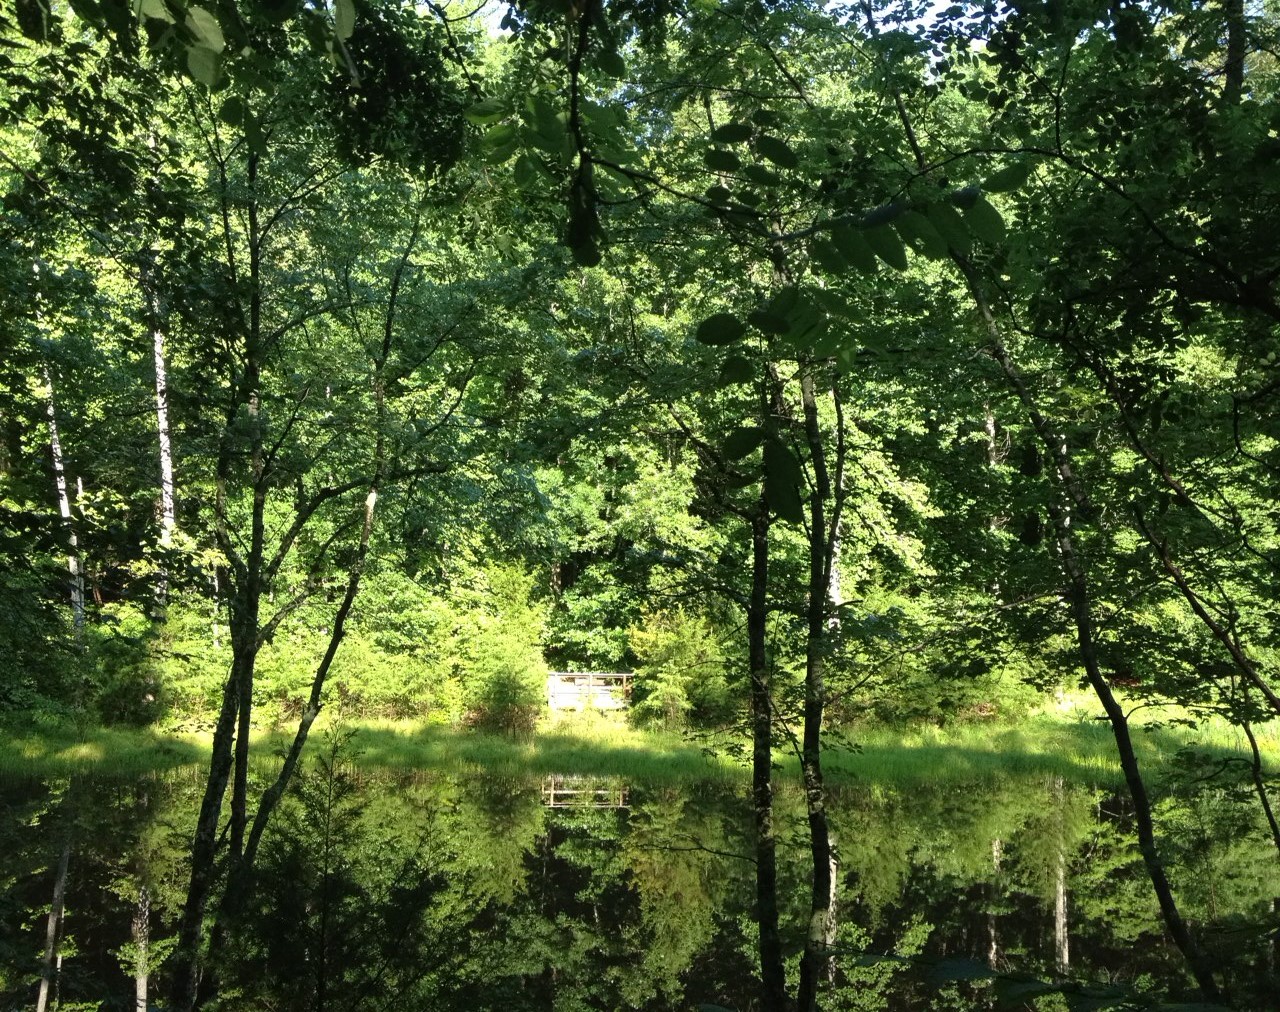 Carter Pond on a sunny day in summer